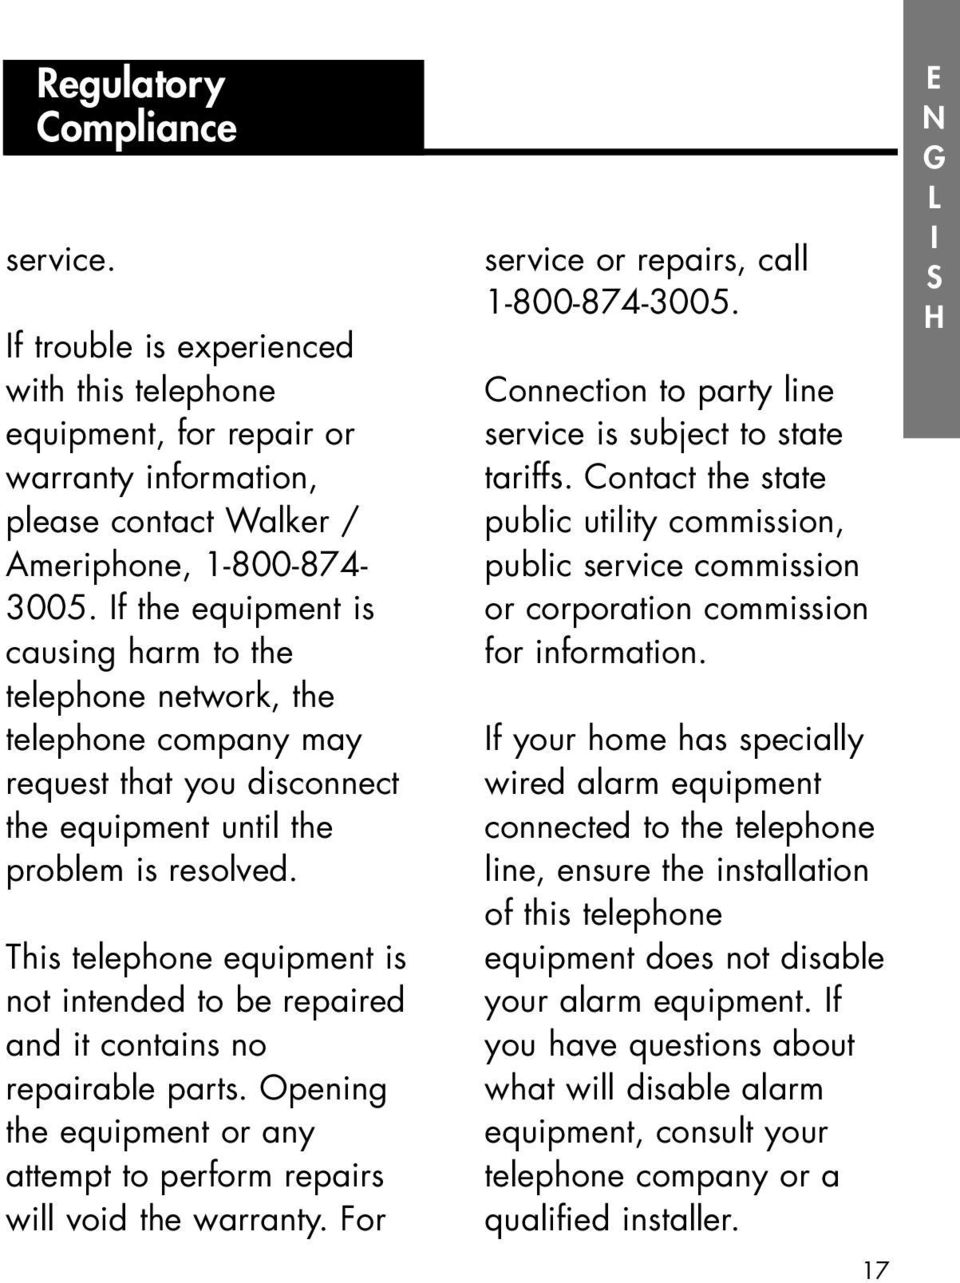 This telephone equipment is not intended to be repaired and it contains no repairable parts. Opening the equipment or any attempt to perform repairs will void the warranty.